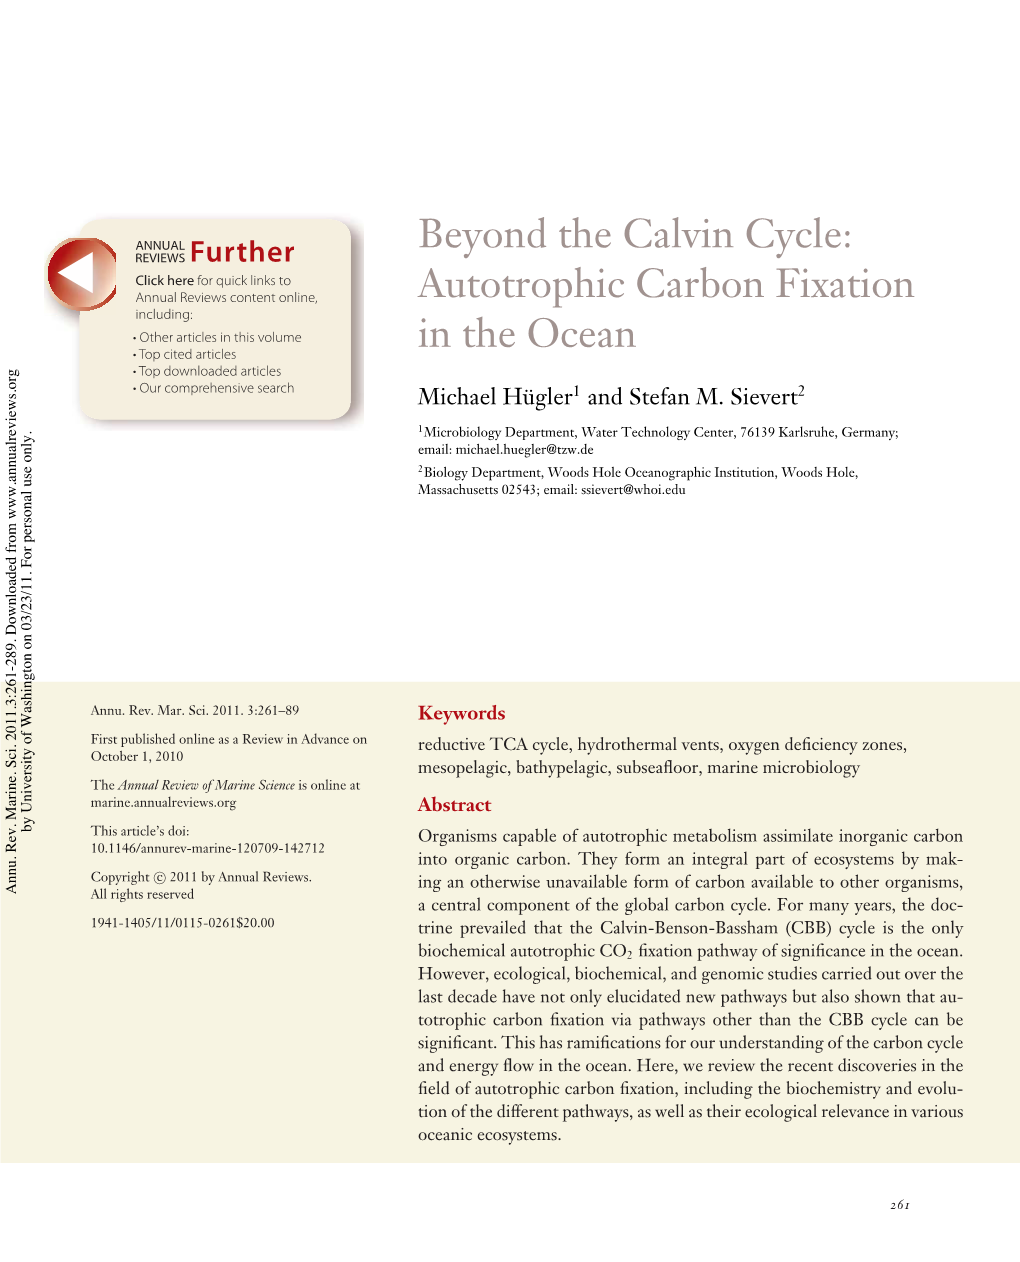 Beyond the Calvin Cycle: Autotrophic Carbon Fixation in the Ocean